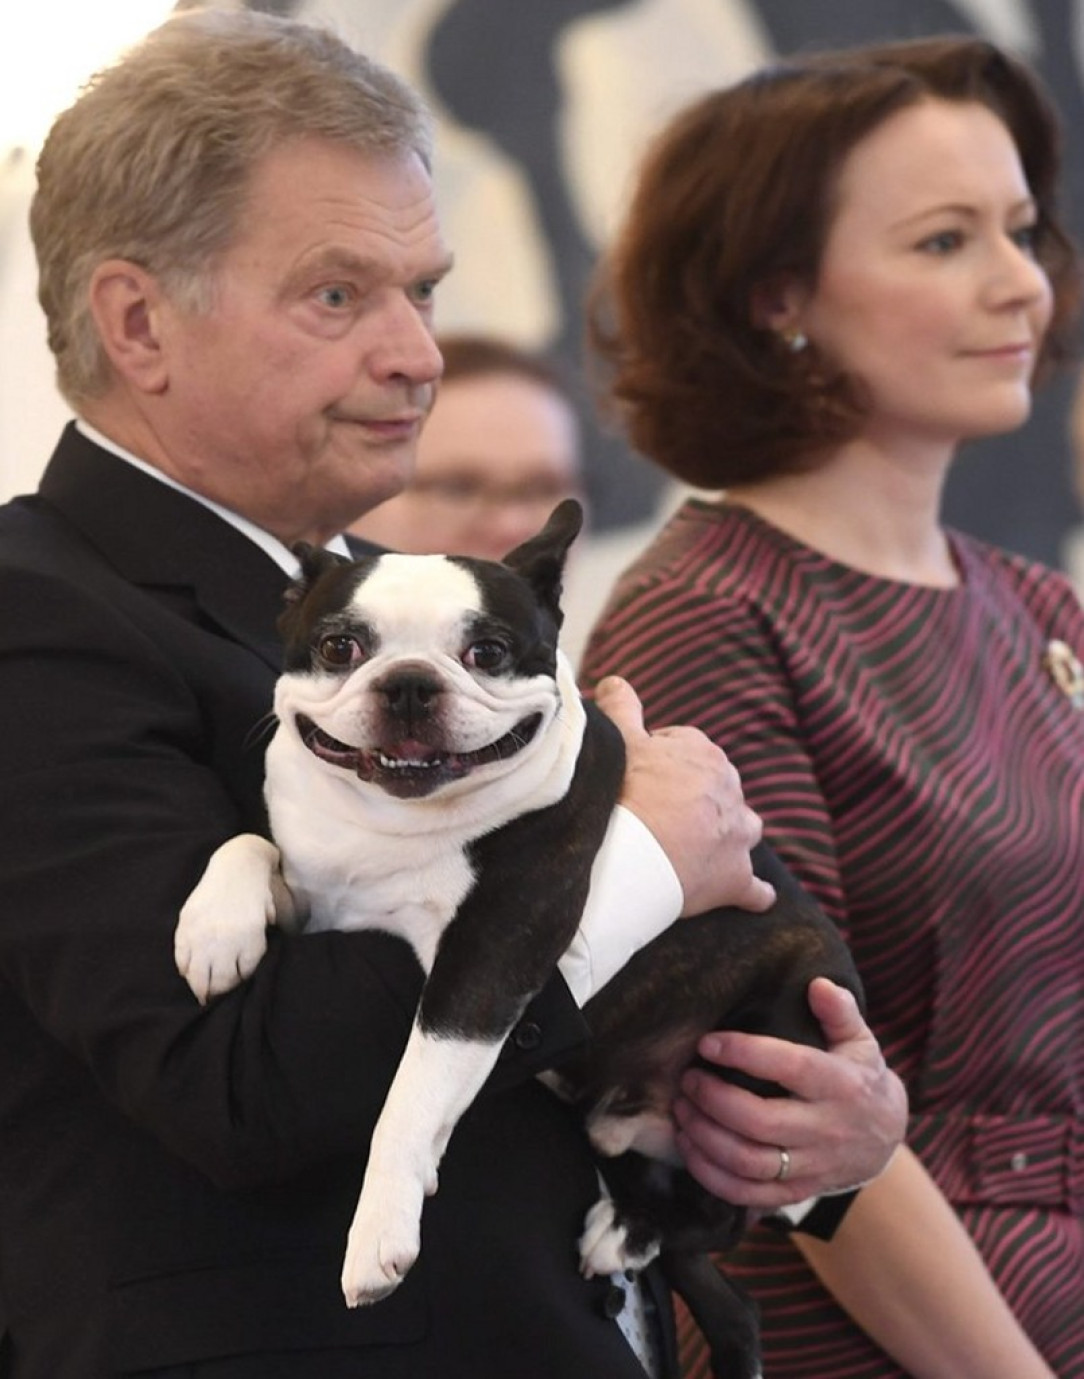 The Finnish president and his dog Lennu 🐶